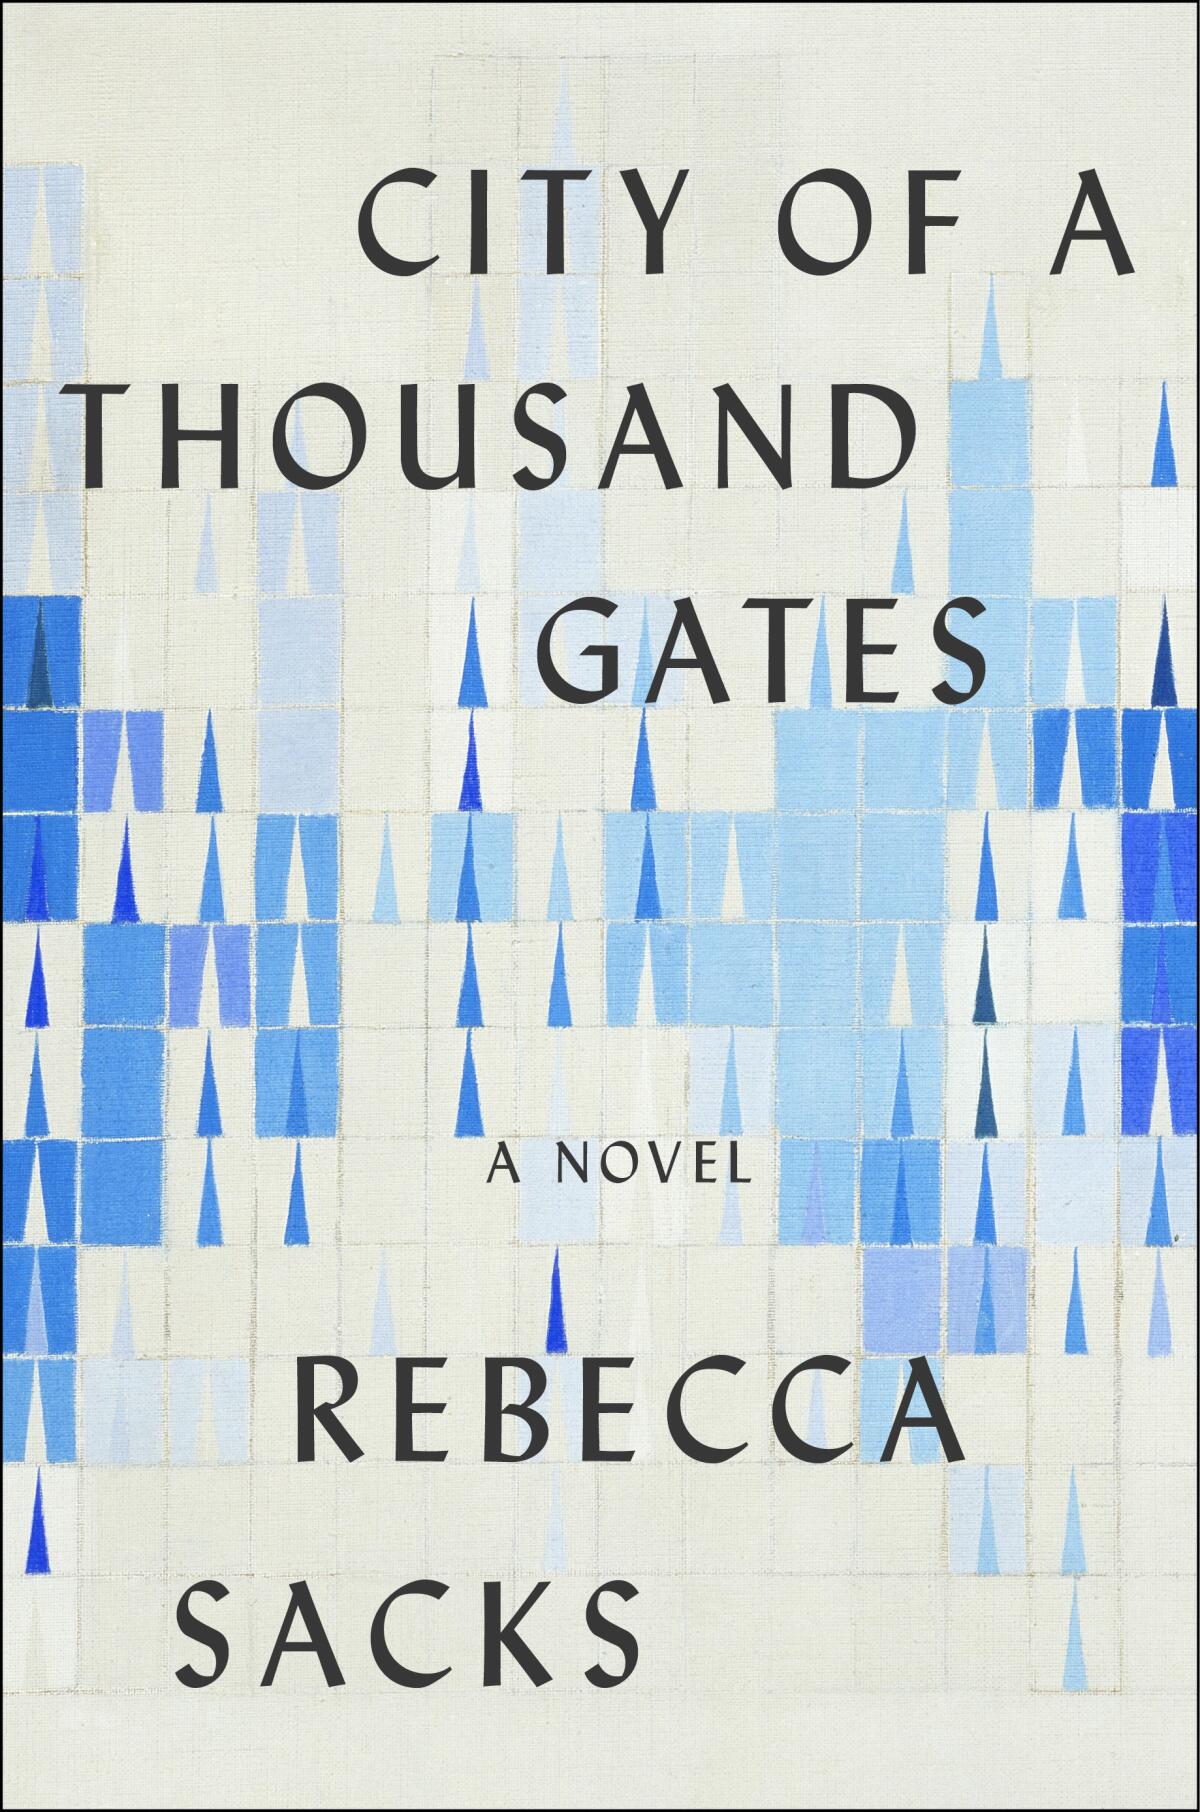 Book jacket of "City of a Thousand Gates," by Rebecca Sacks.